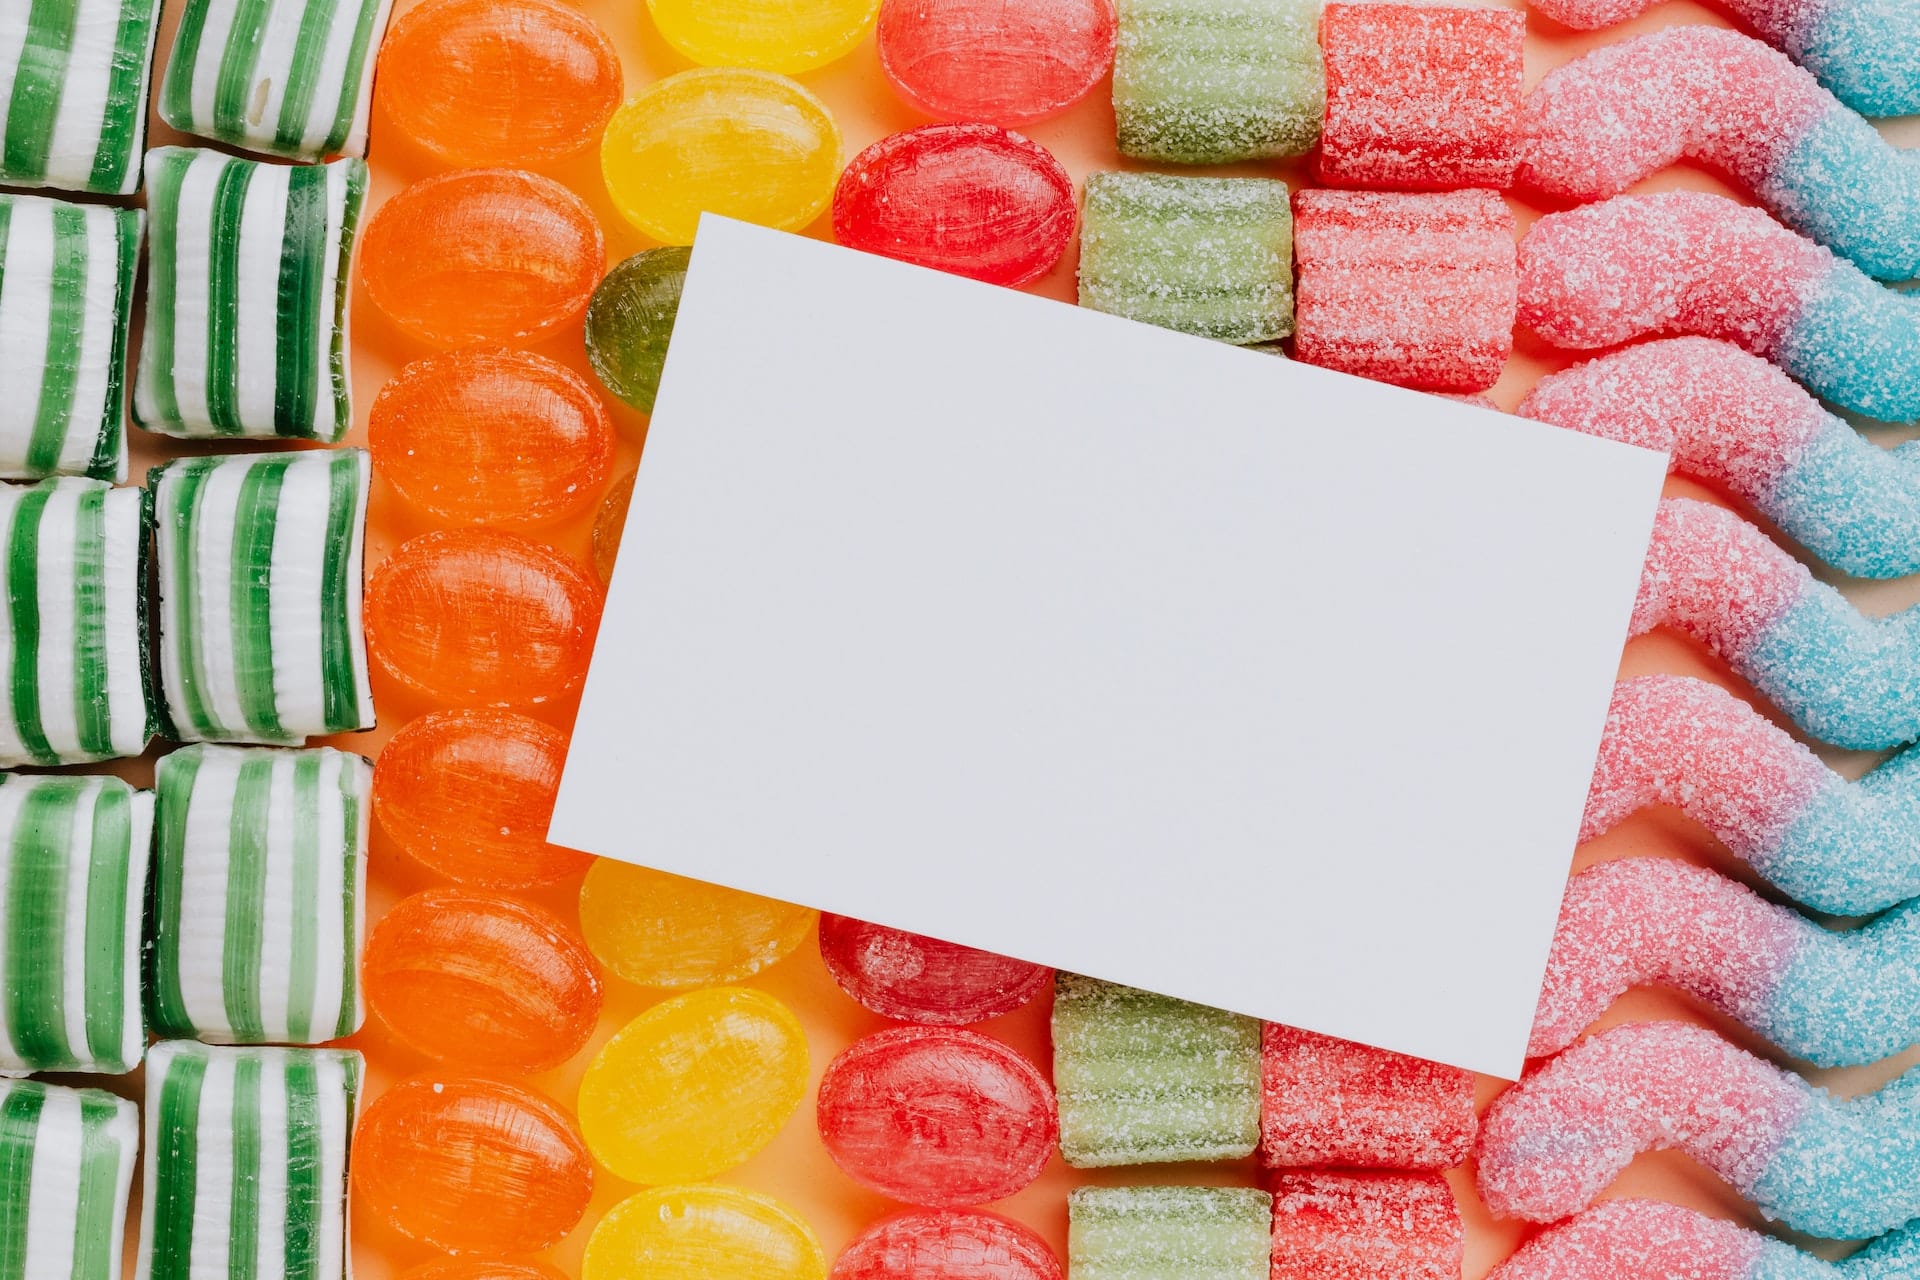 Photo by Karolina Grabowska: https://www.pexels.com/photo/empty-paper-placed-on-various-multicolored-candies-in-rows-4016508/